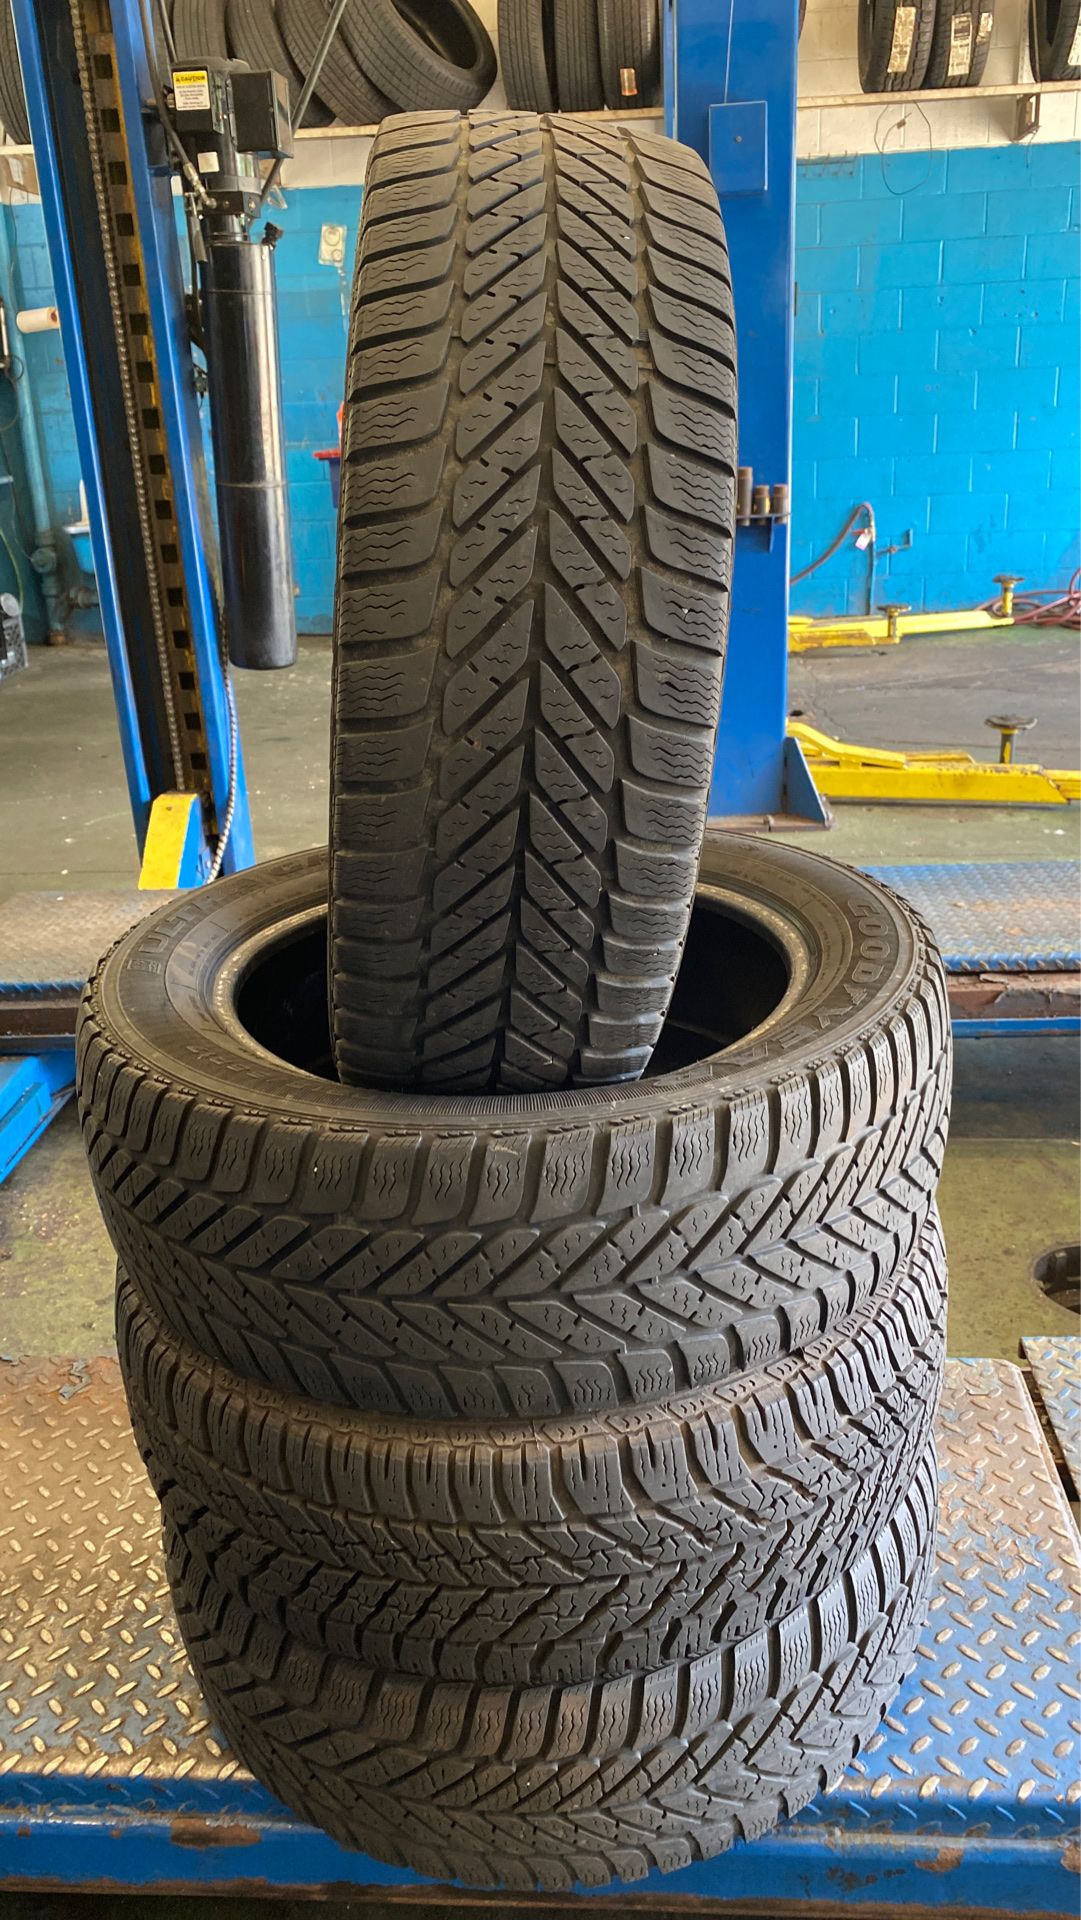 215/55/17 rugged tires